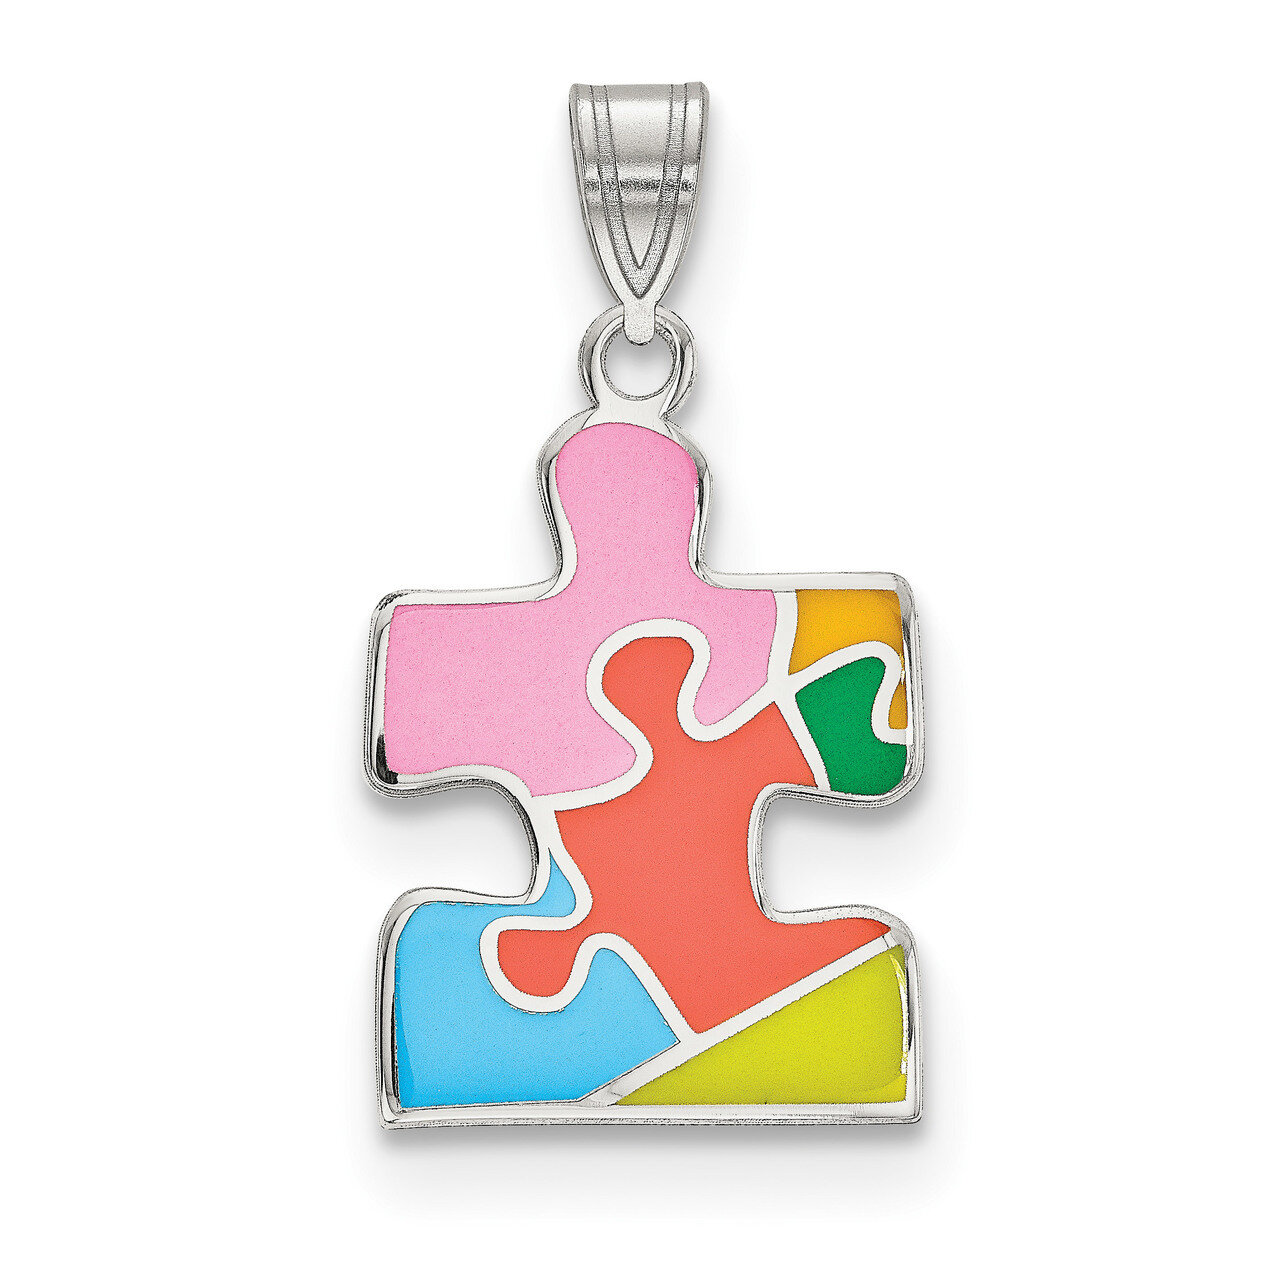 Autism Puzzle Piece Pendant Sterling Silver Rhodium-plated Enameled QC9337